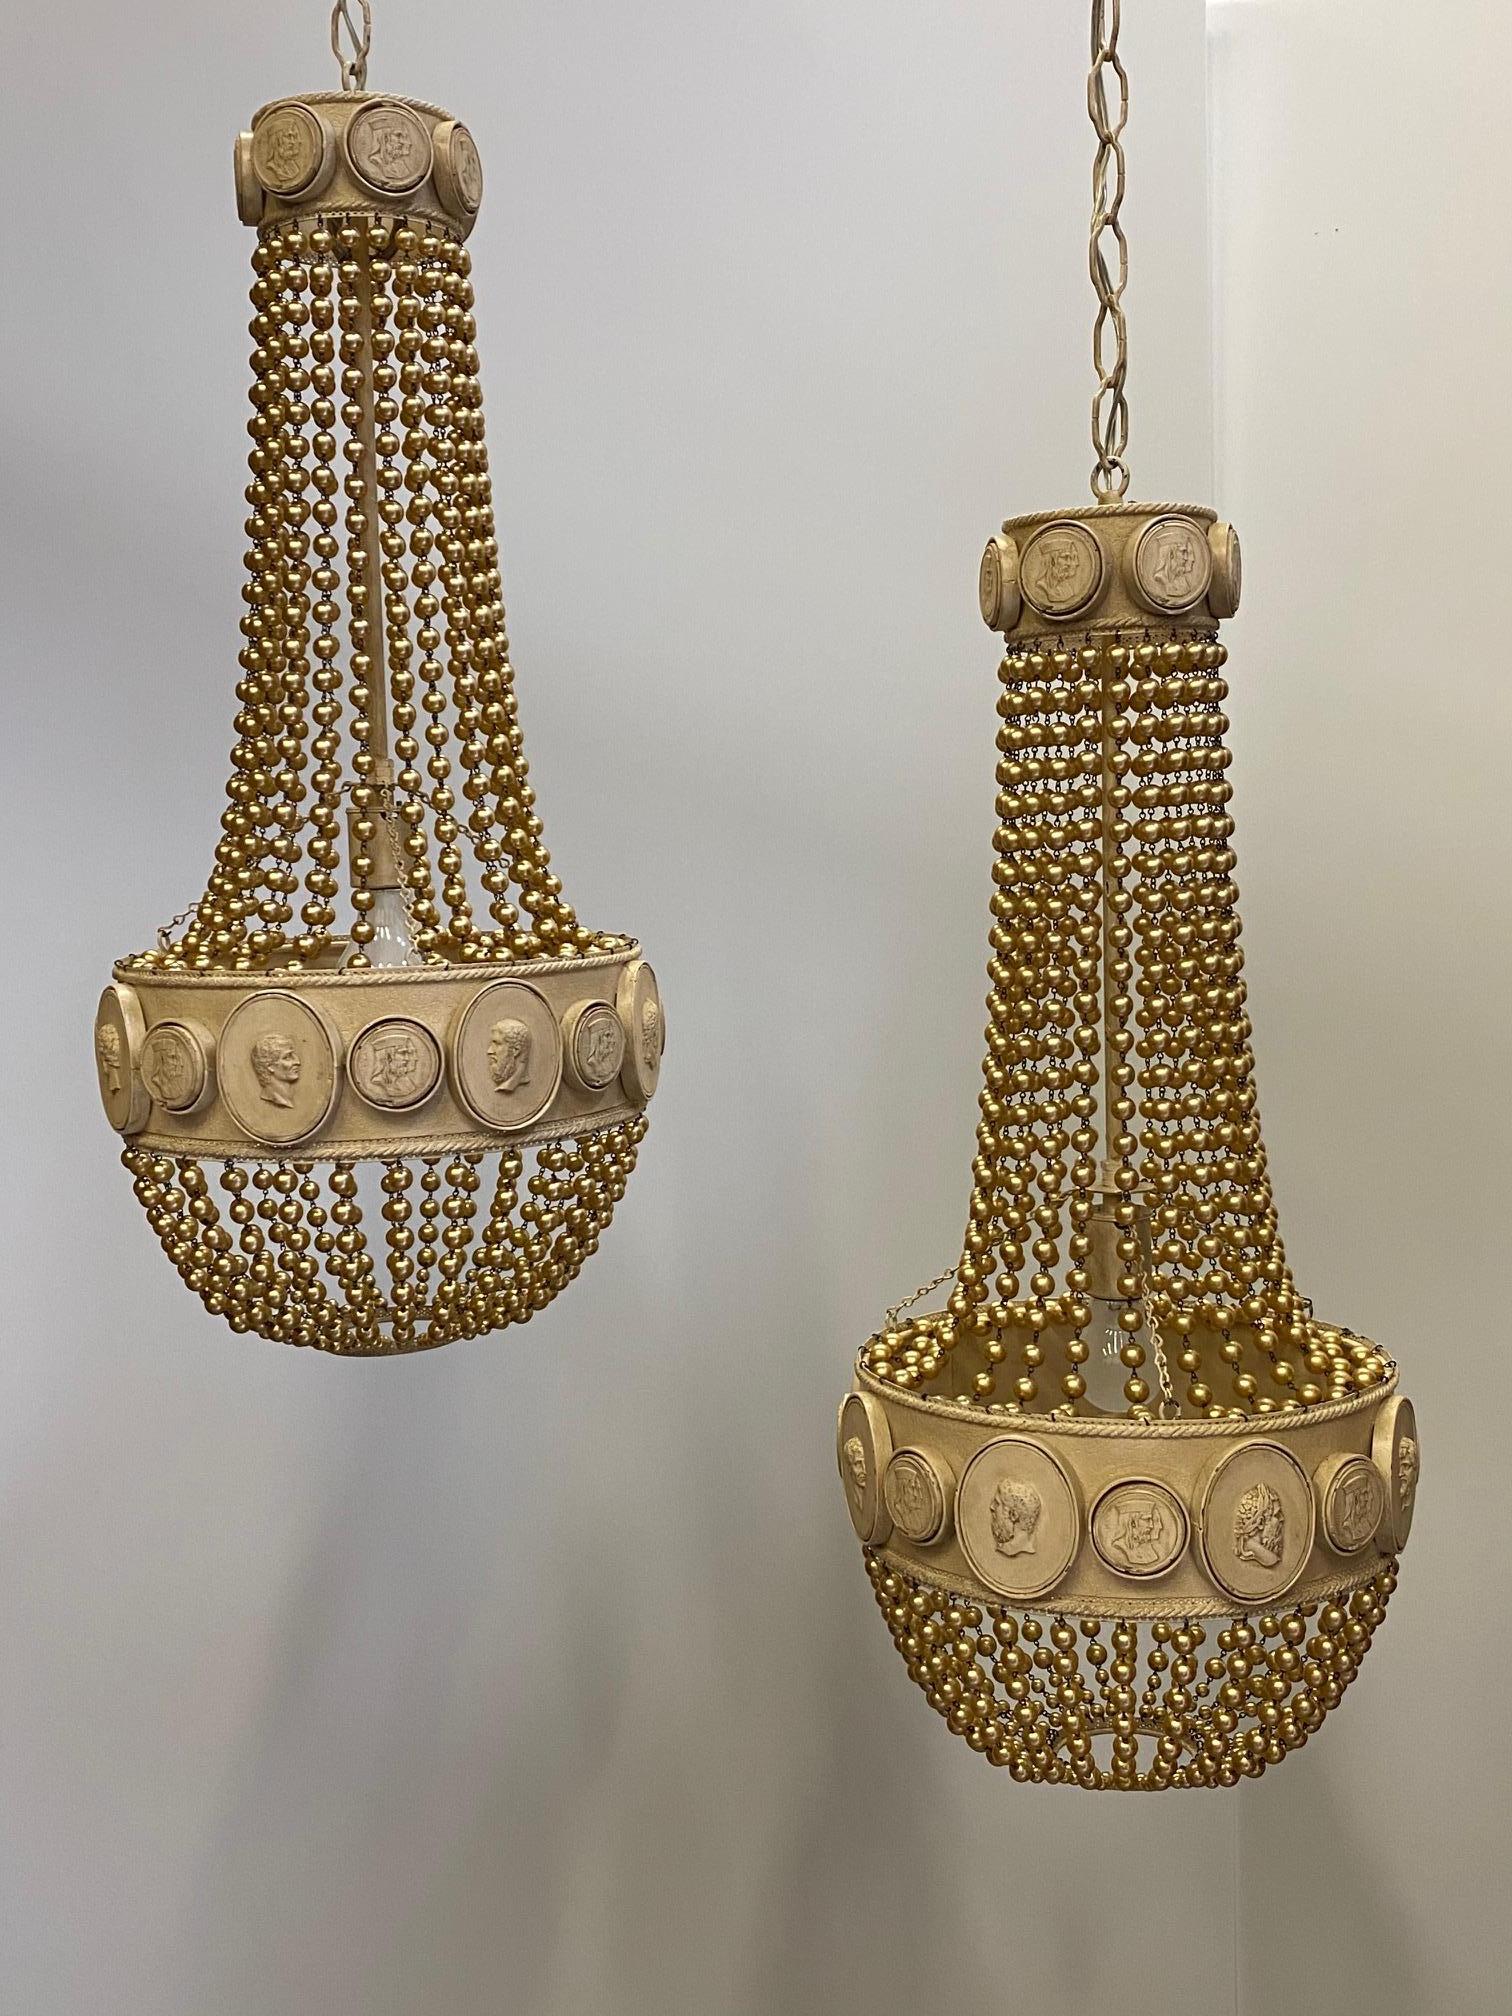 Dramatic pair of Hollywood Regency pendant chandeliers having taupe colored cast metal construction with cascading necklaces of pearl finished beads and neoclassical style medallions around the top and lower band.